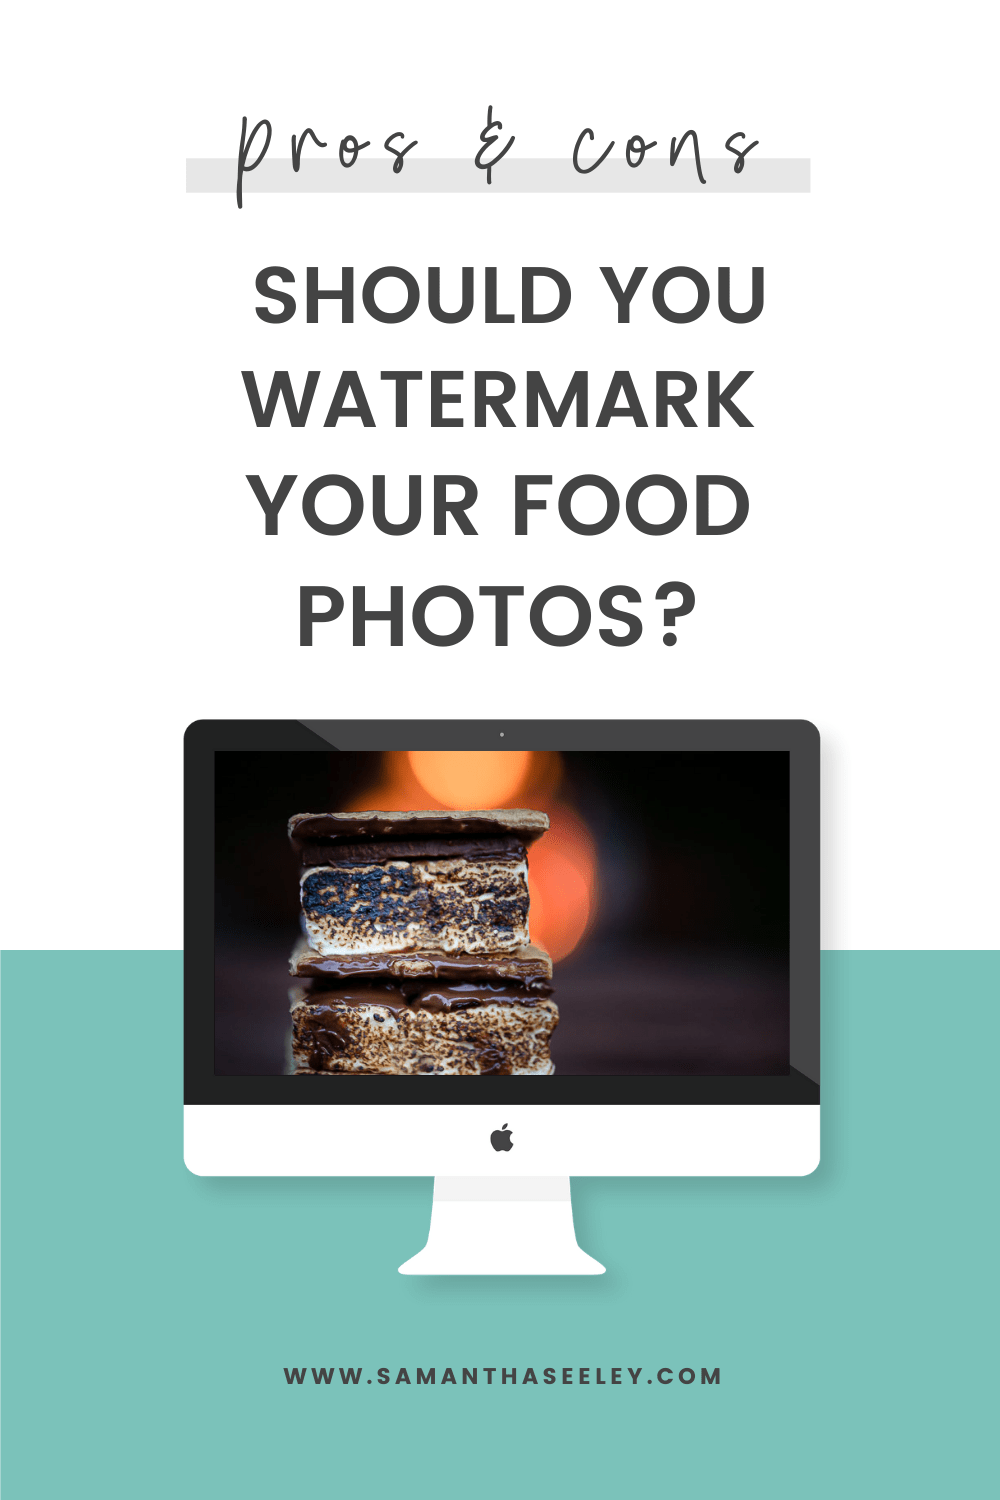 should you watermark your food photos